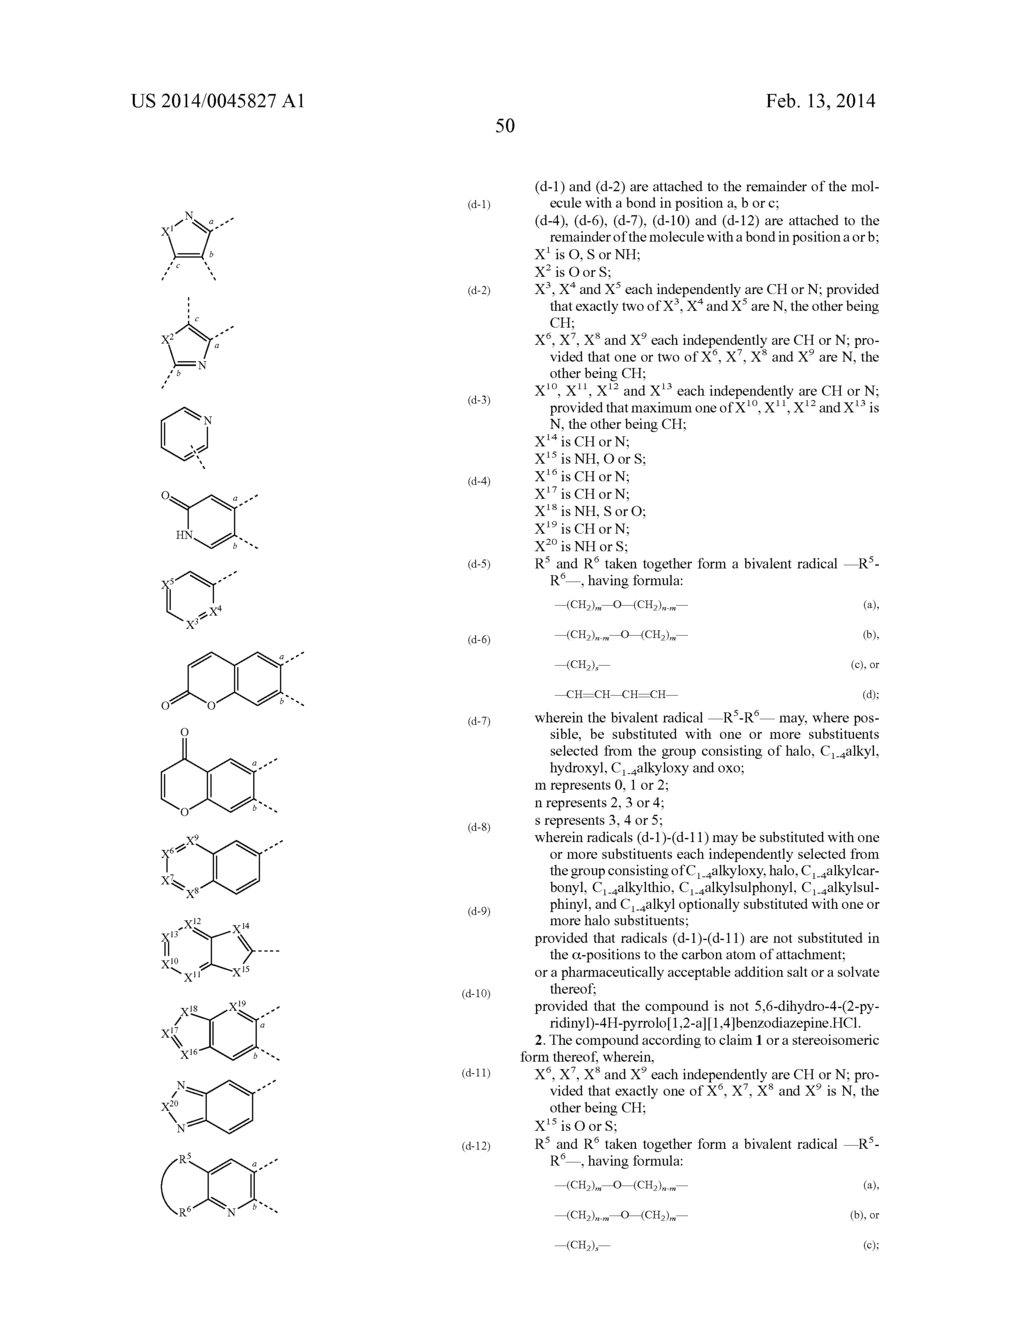 NOVEL ANTIFUNGAL 5,6-DIHYDRO-4H-PYRROLO[1,2-a][1,4]BENZO-DIAZEPINES AND     6H-PYRROLO[1,2-a][1,4]BENZODIAZEPINES SUBSTITUTED WITH HETEROCYCLIC     DERIVATIVES - diagram, schematic, and image 51